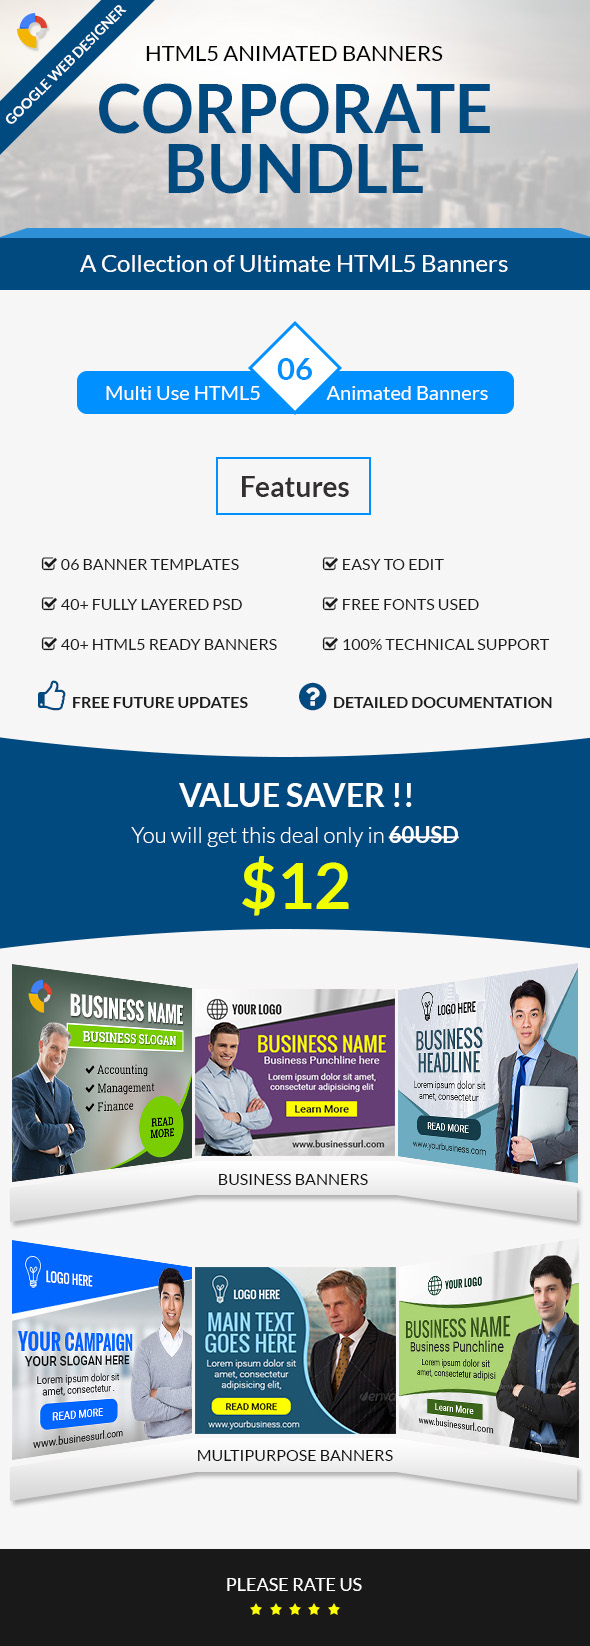 Corporate Bundle 6 in 1 HTML5 Animated Banner Templates